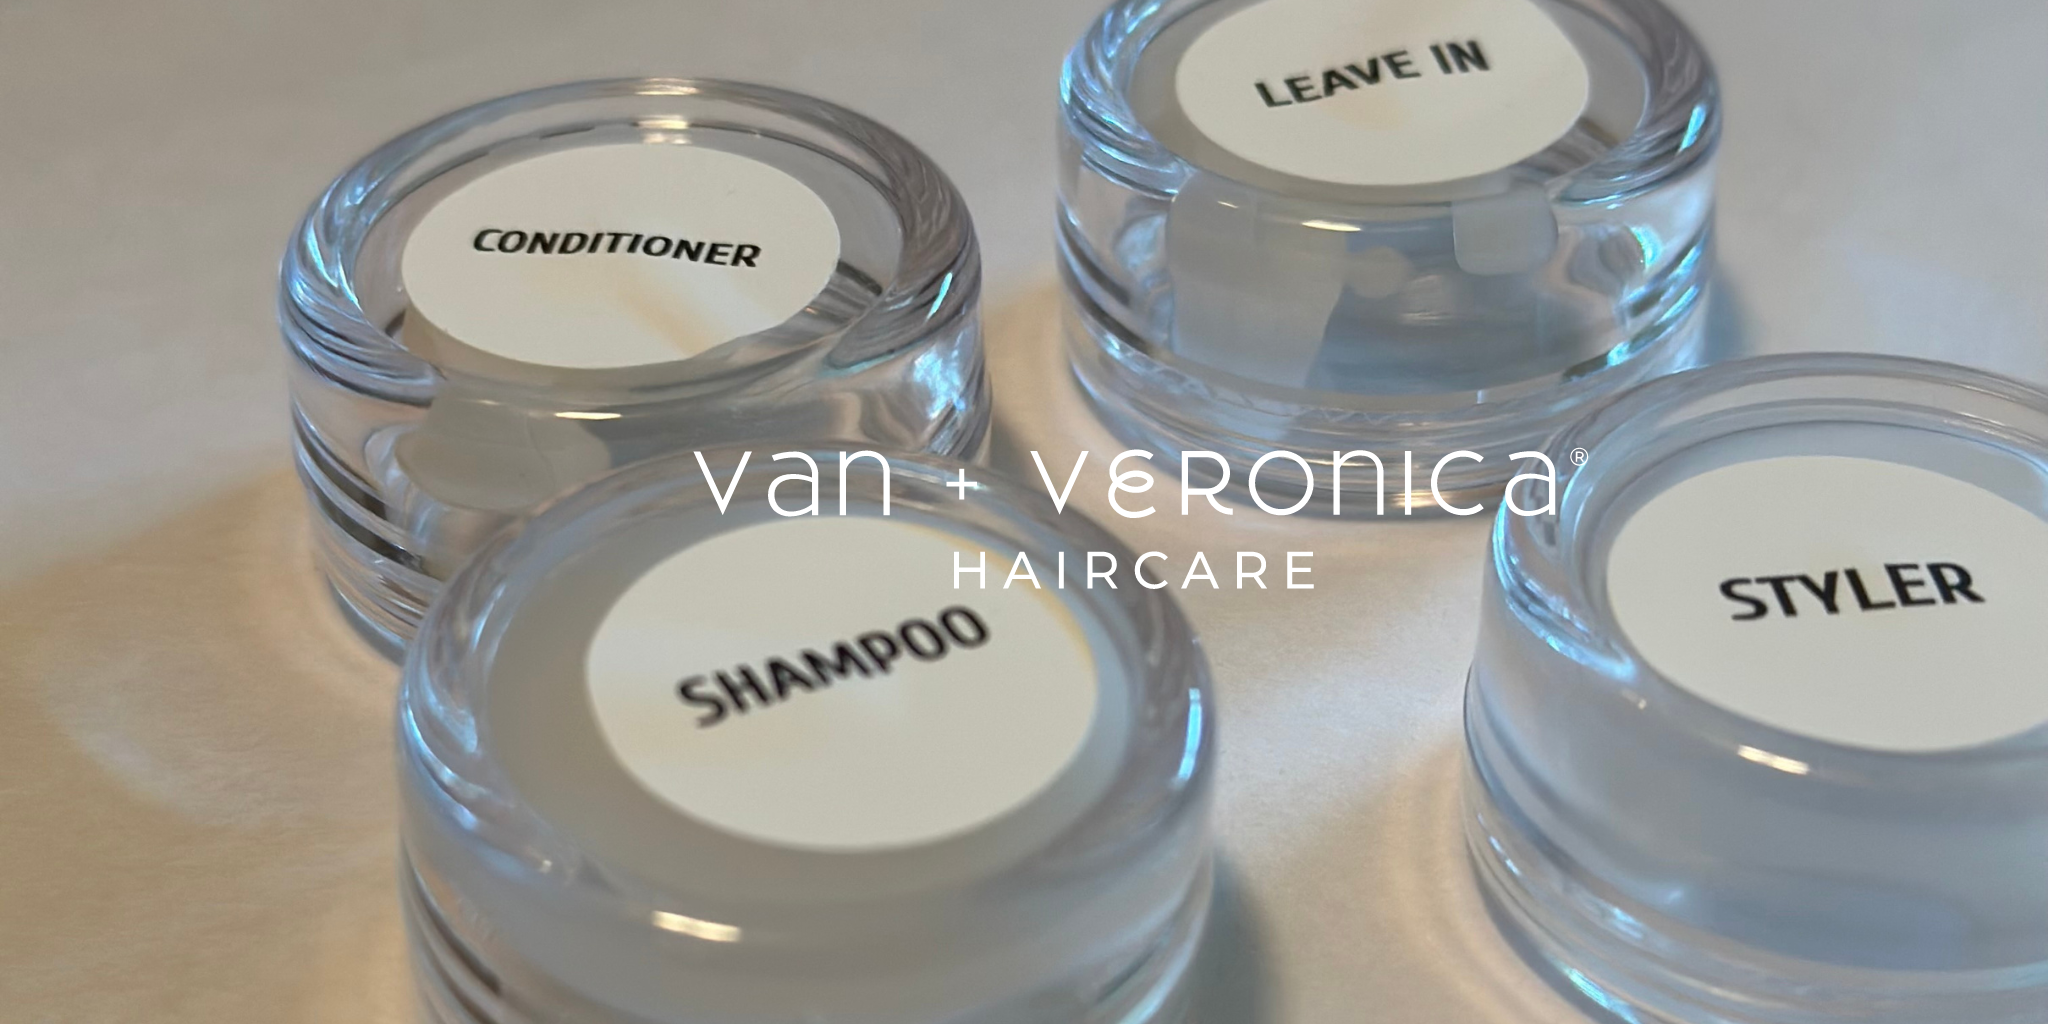 Sensitivity Samples by van + veronica Haircare (Shampoo, Conditioner, Leave-In and Styler)